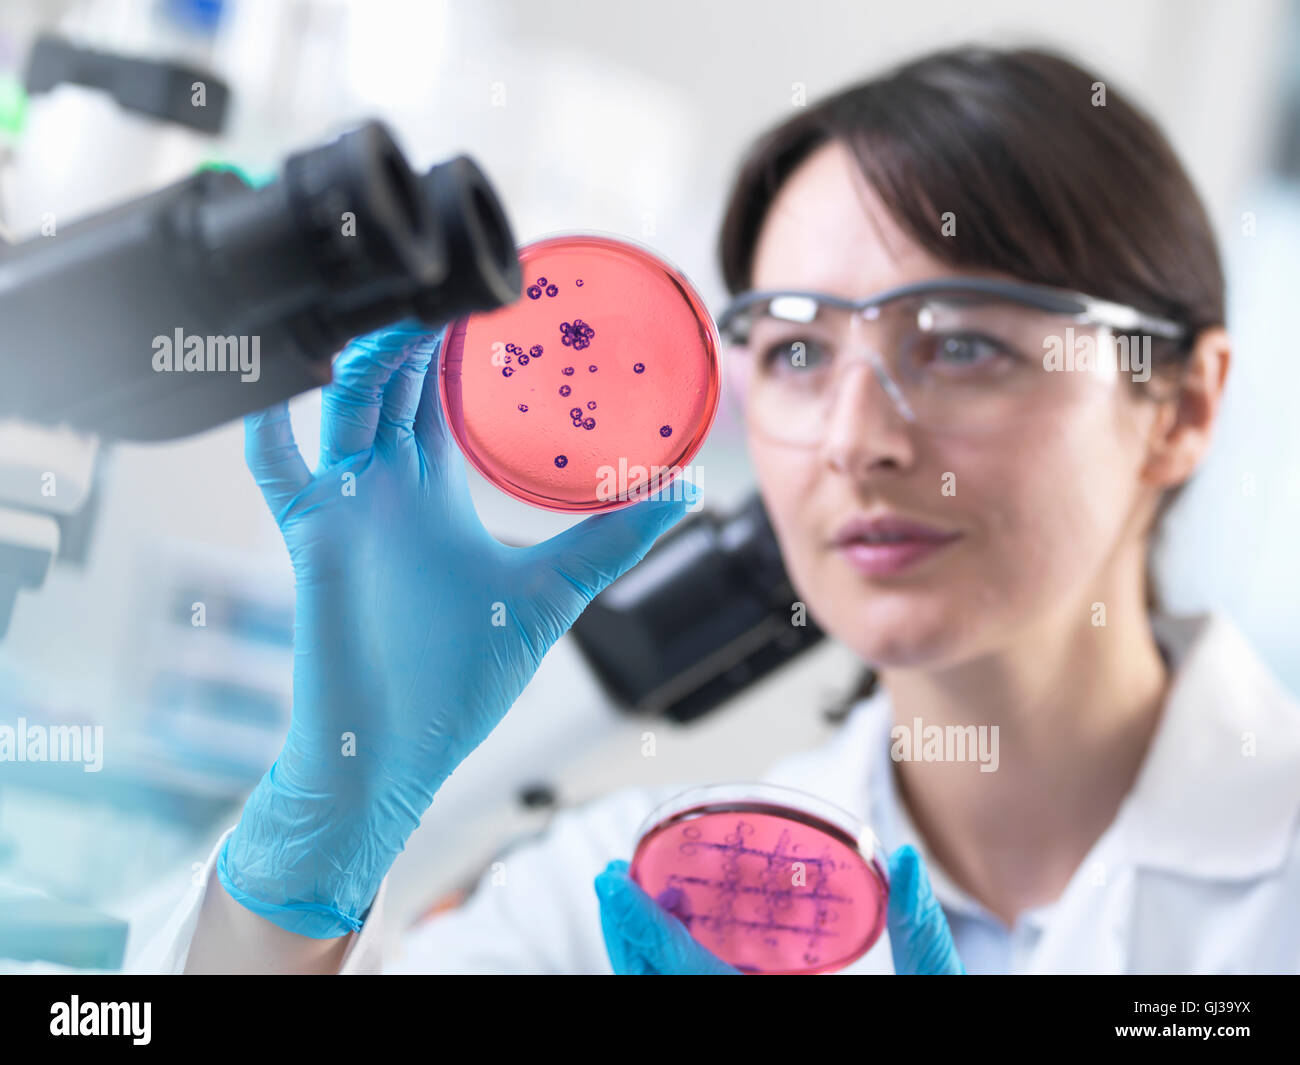 Scientist examining petri dish containing bacterial culture grown in laboratory Stock Photo